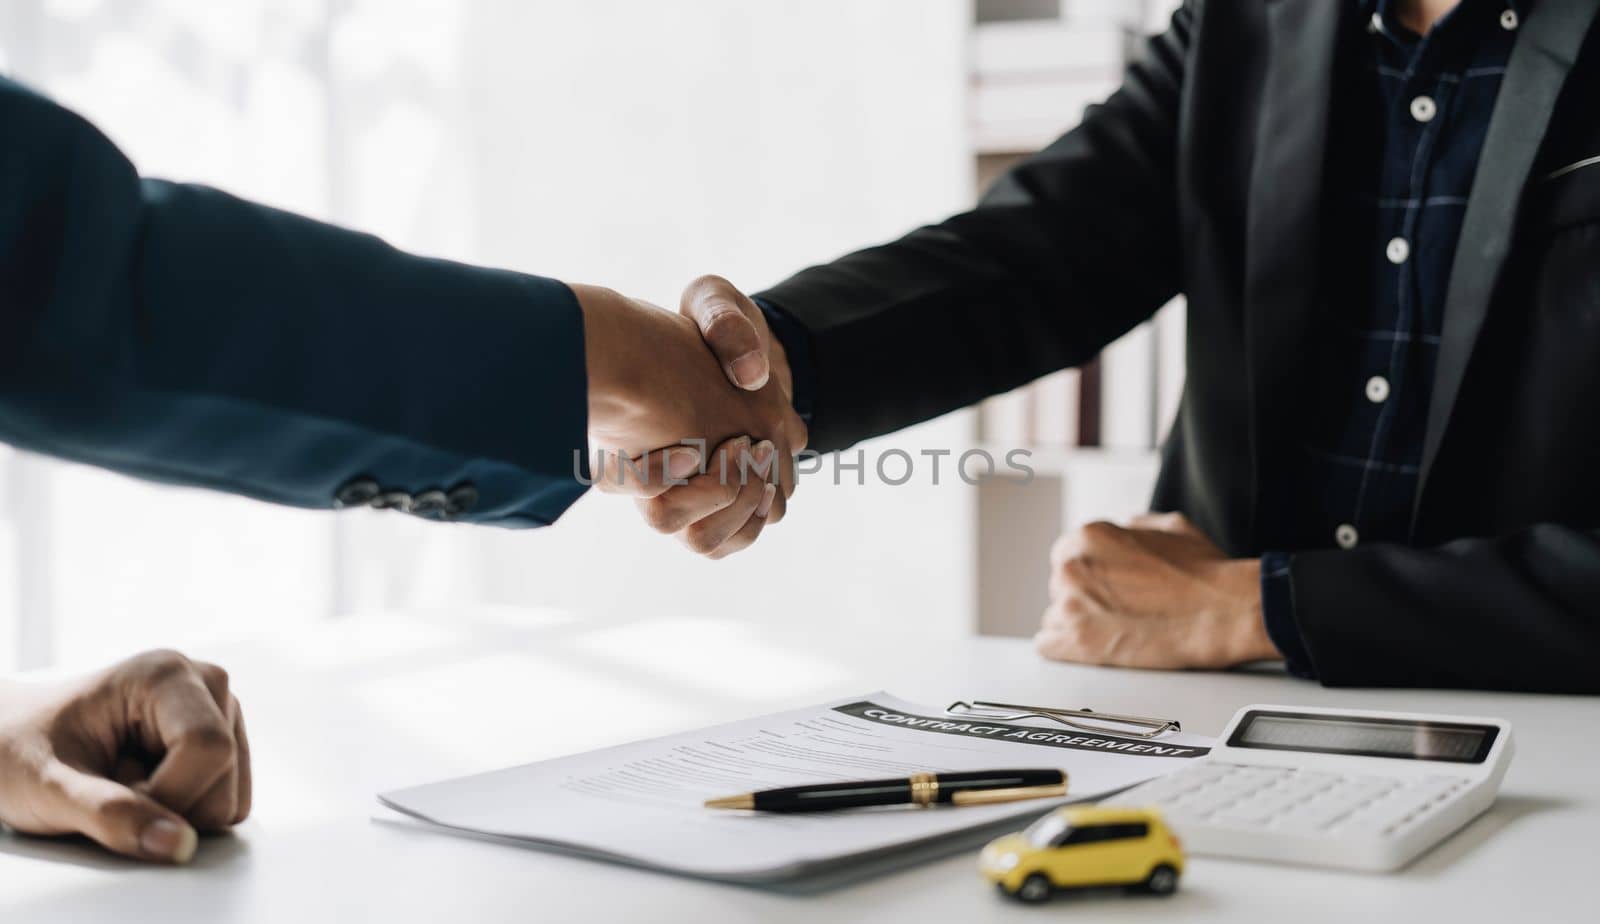 Handshake of cooperation customer and salesman after agreement, successful car loan contract buying or selling new vehicle..